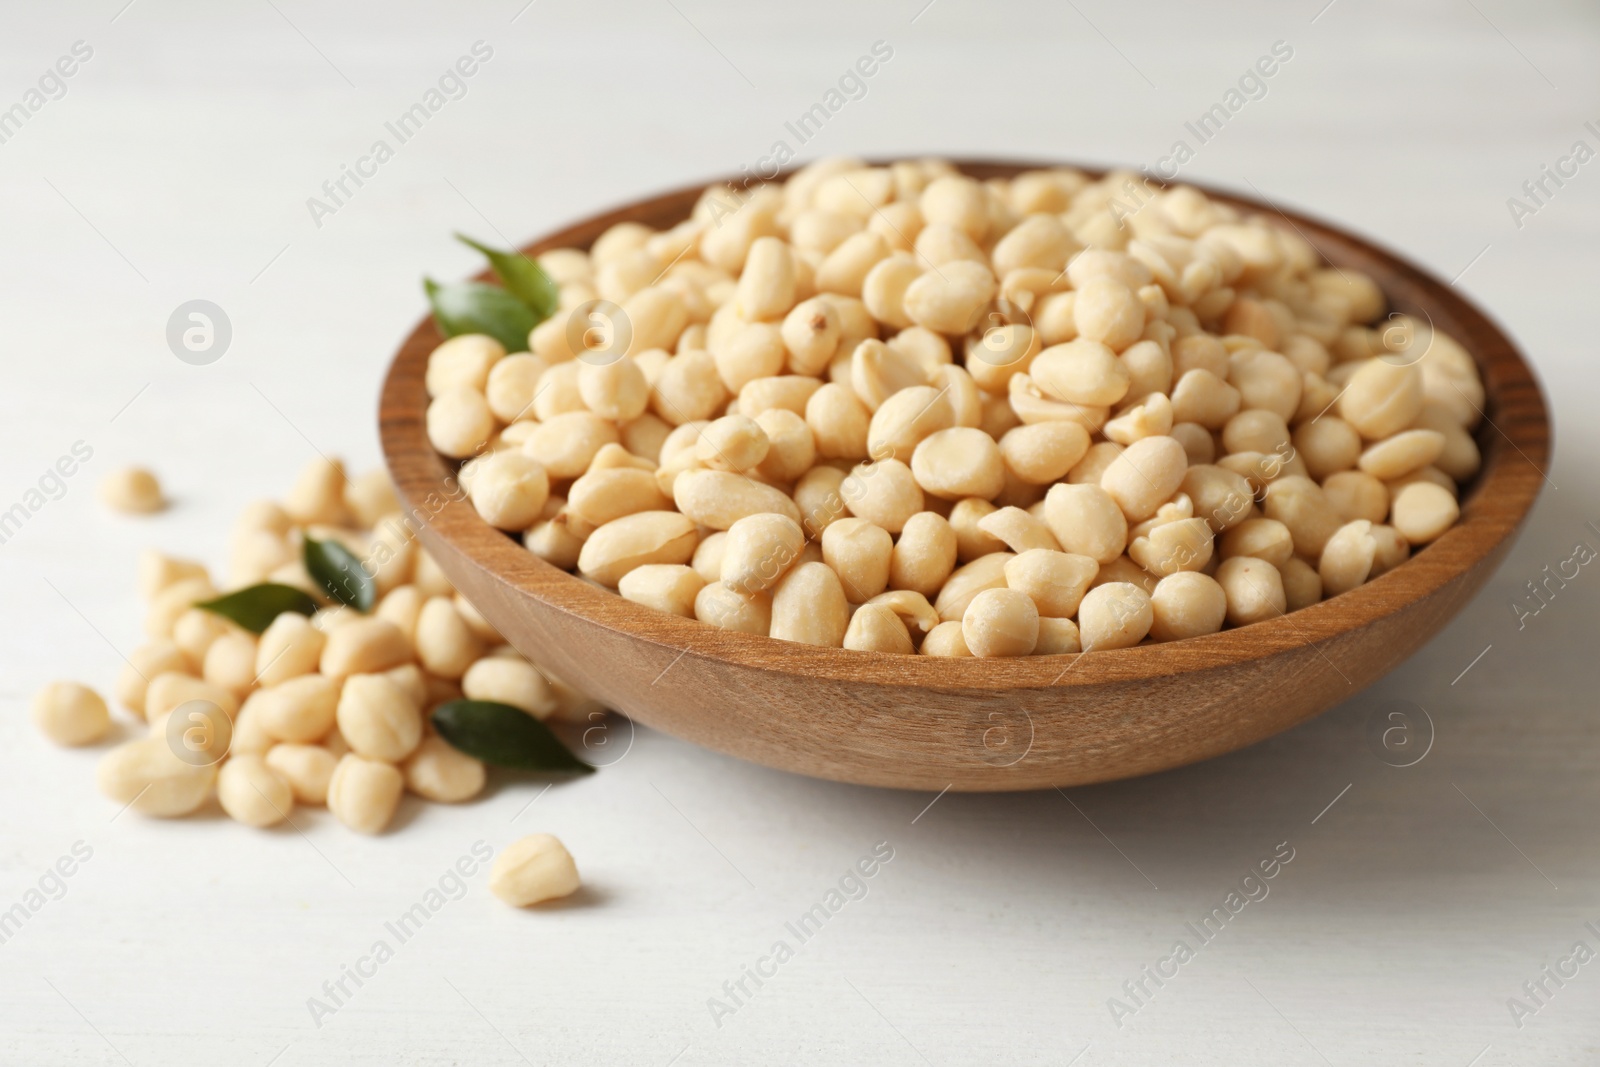 Photo of Shelled peanuts in wooden bowl on table